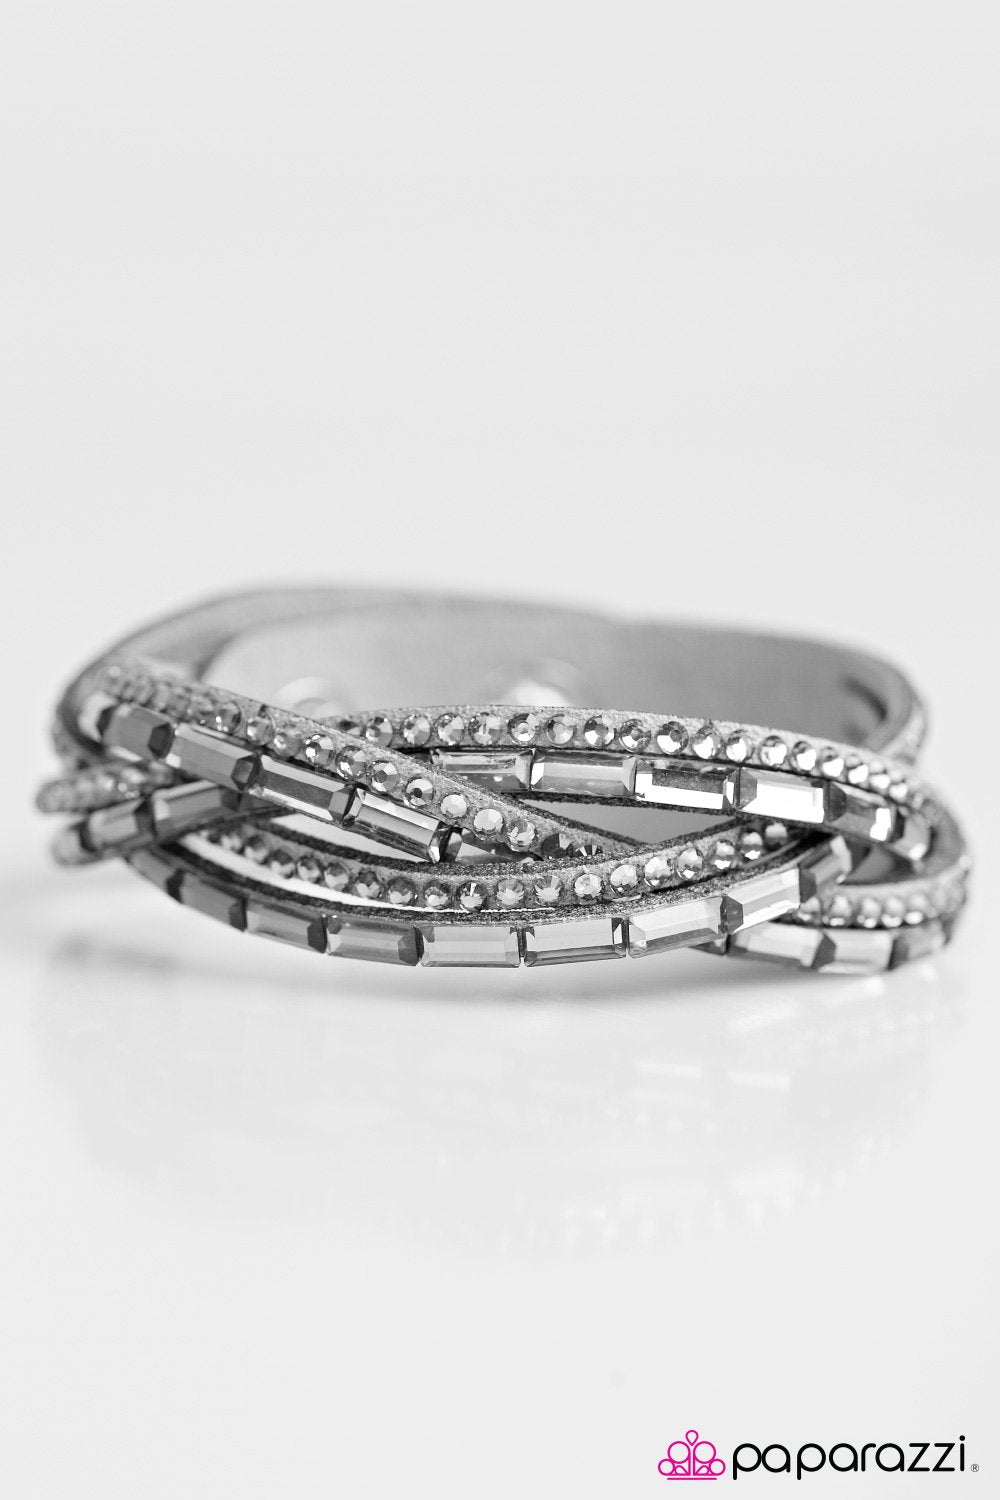 Too Cool for School Silver Braided Urban Wrap Snap Bracelet - Paparazzi Accessories-CarasShop.com - $5 Jewelry by Cara Jewels